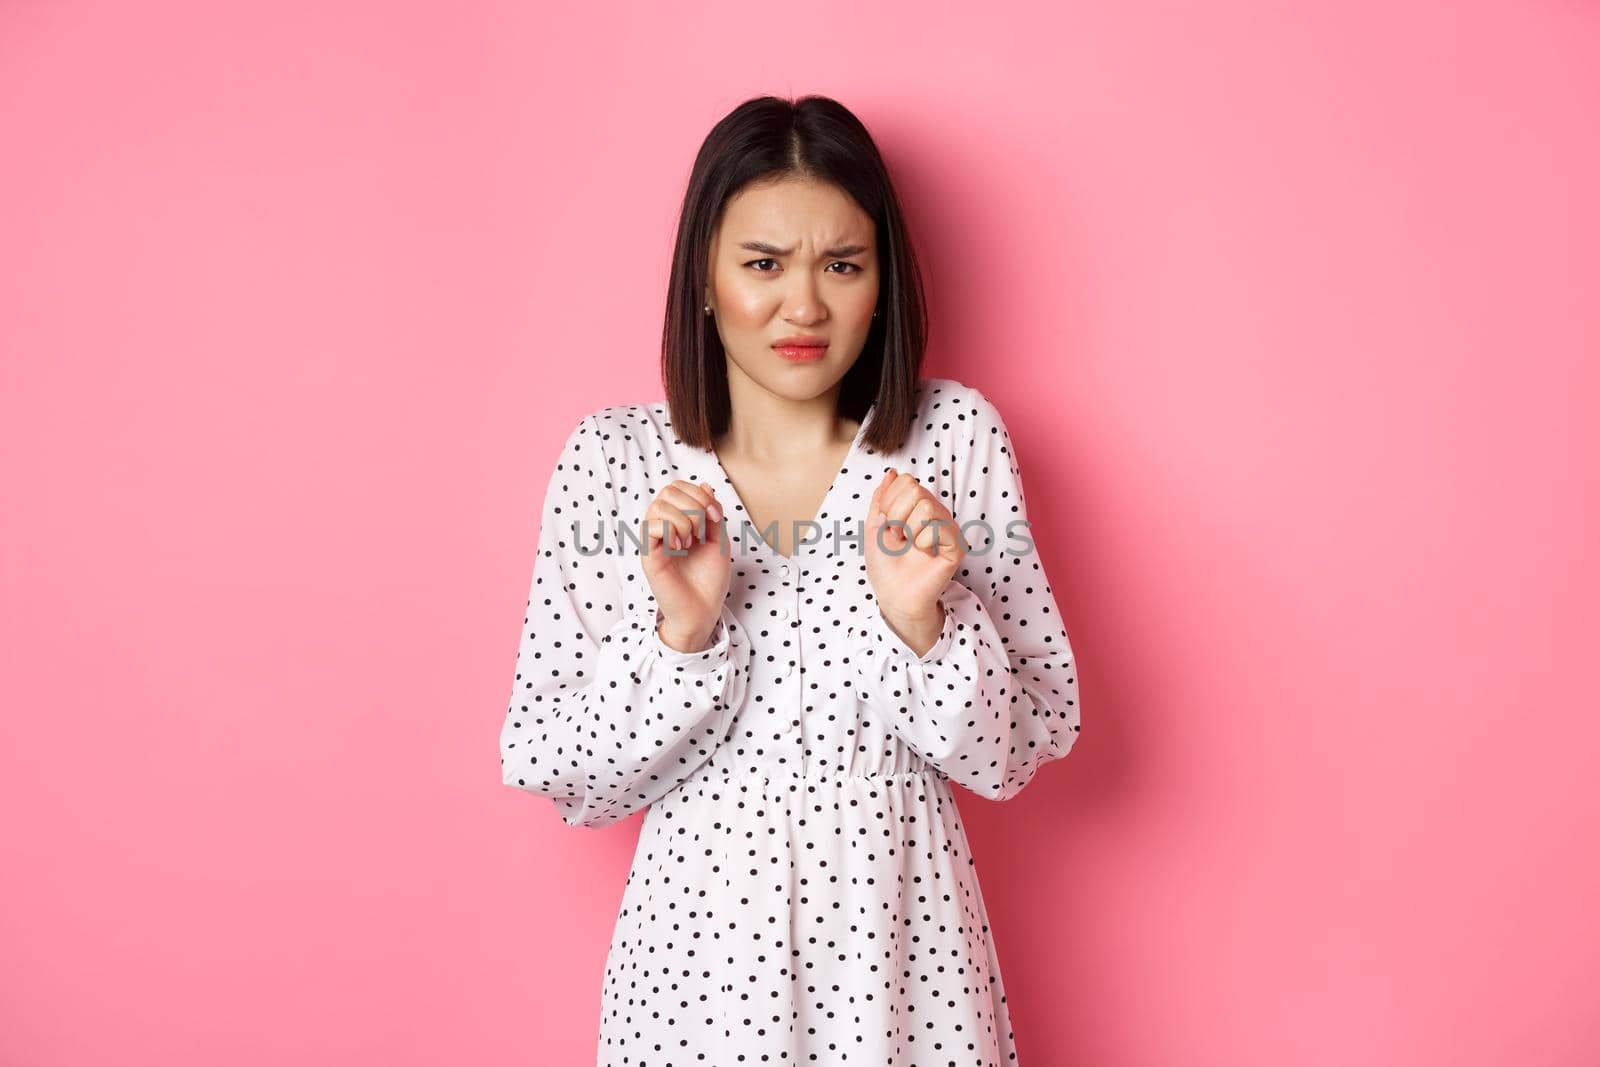 Disgusted asian woman staring with aversion and dislike, frowning and grimacing dissatisfied, standing in dress against pink background.